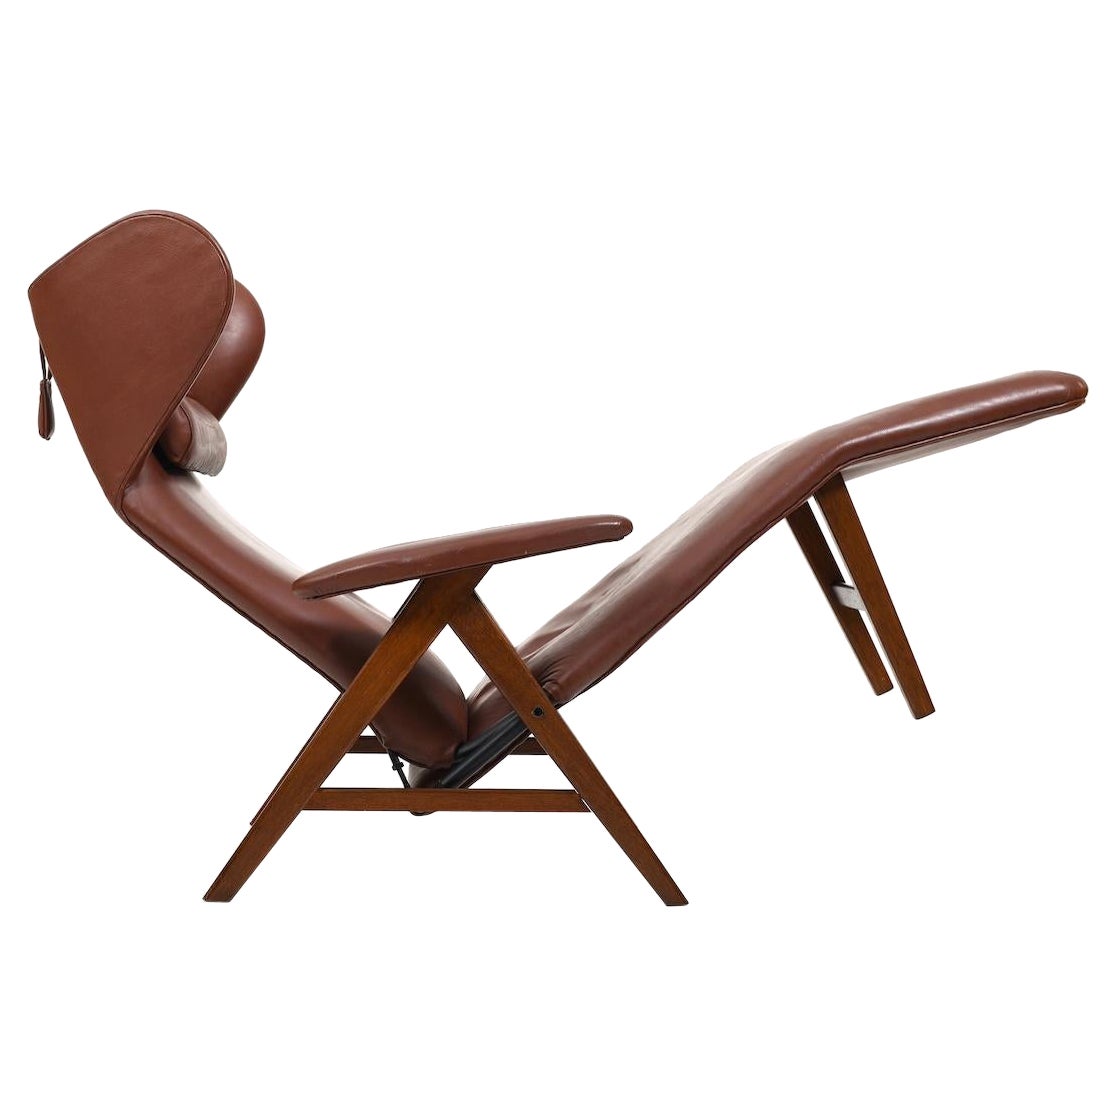 Teak Lounge Chair by Henry W. Klein for Bramin 1950s